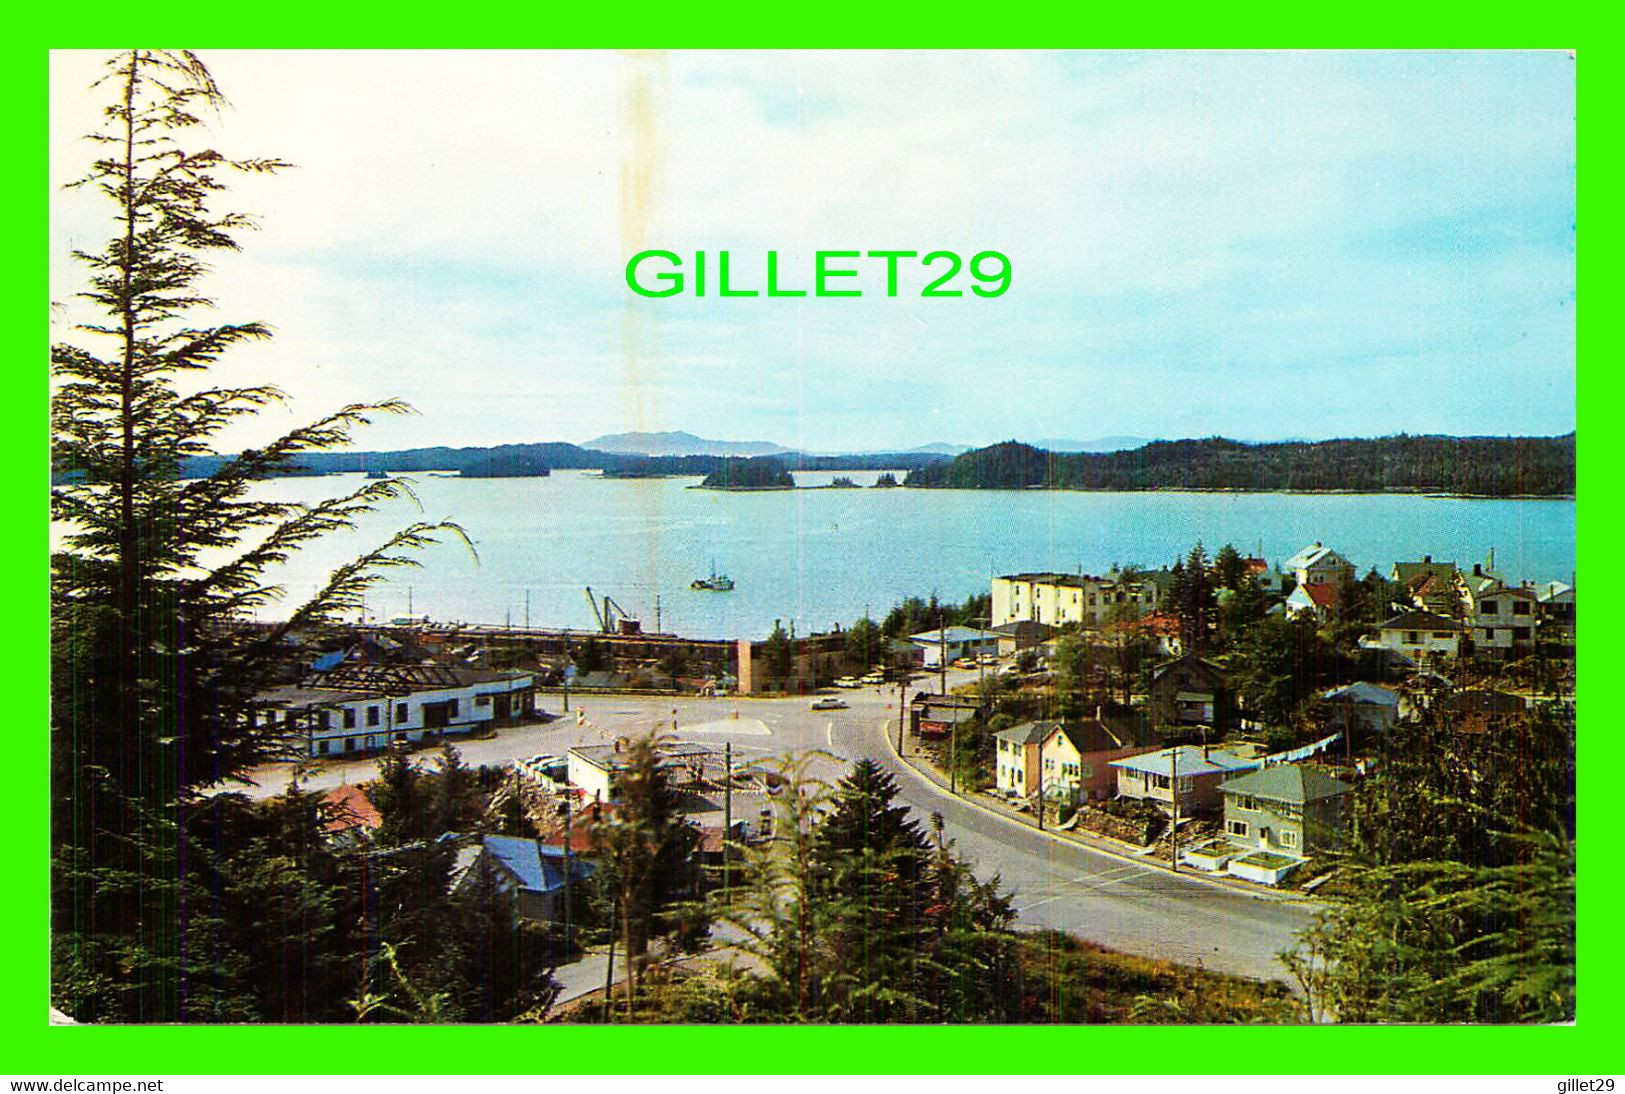 PRINCE RUPERT, BC - A PORTION OF THE CITY LOOKING WEST TOWARDS THE PACIFIC - TAYLORCHROME - WRATHALL'S - - Prince Rupert